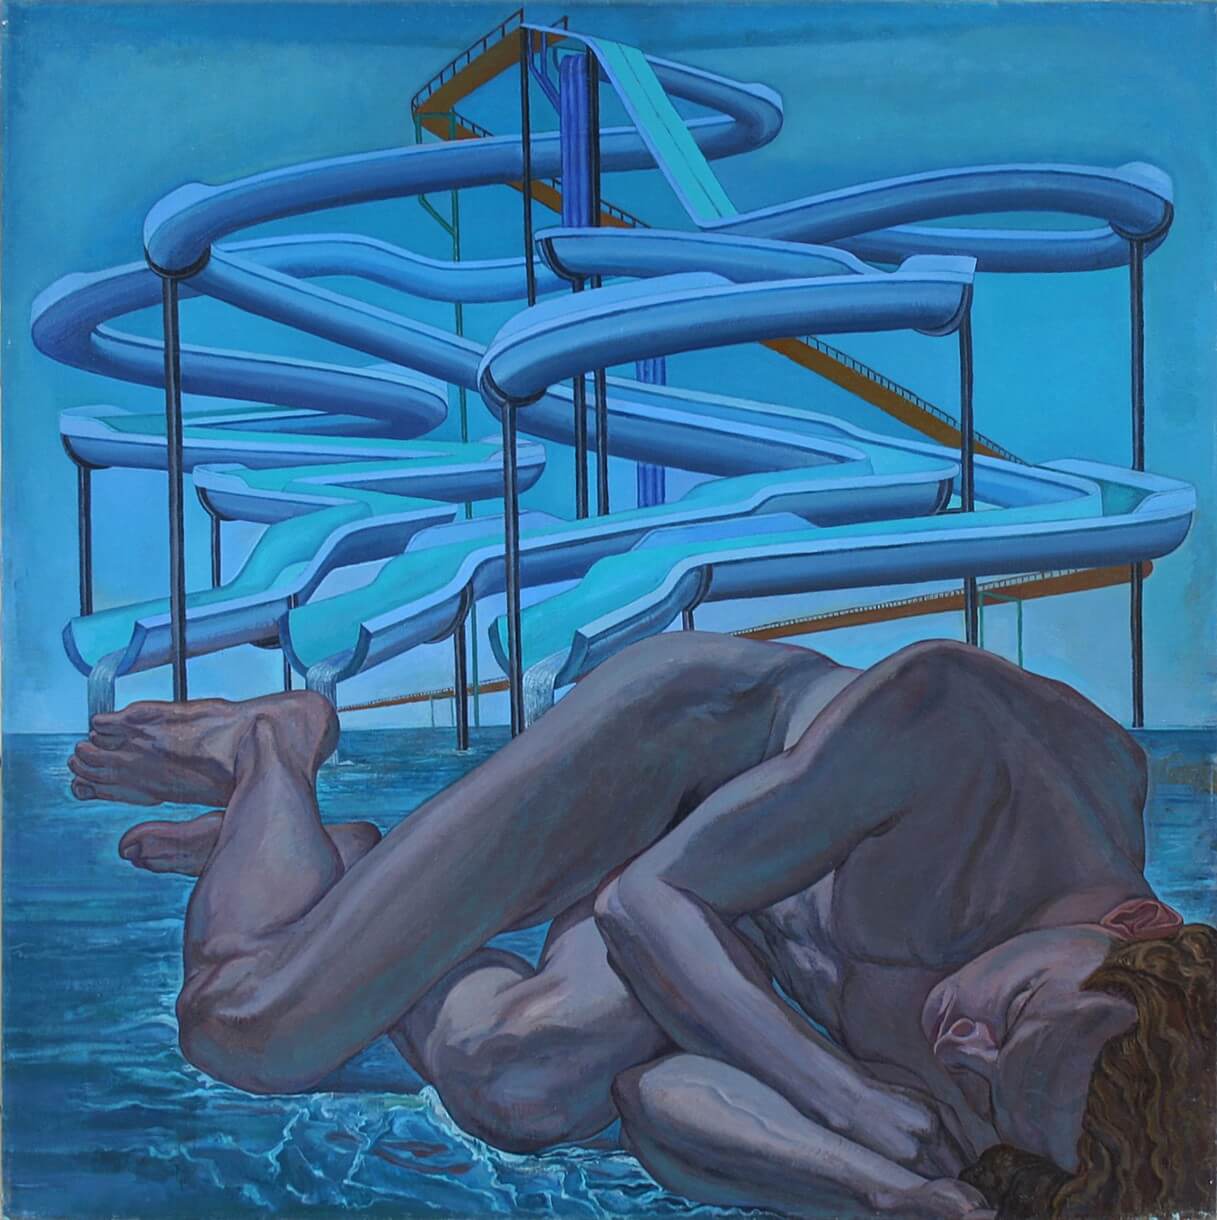 Margaret McCann, Water Country, 1995 - 2005, 40 x 40 inches (courtesy of the artist)